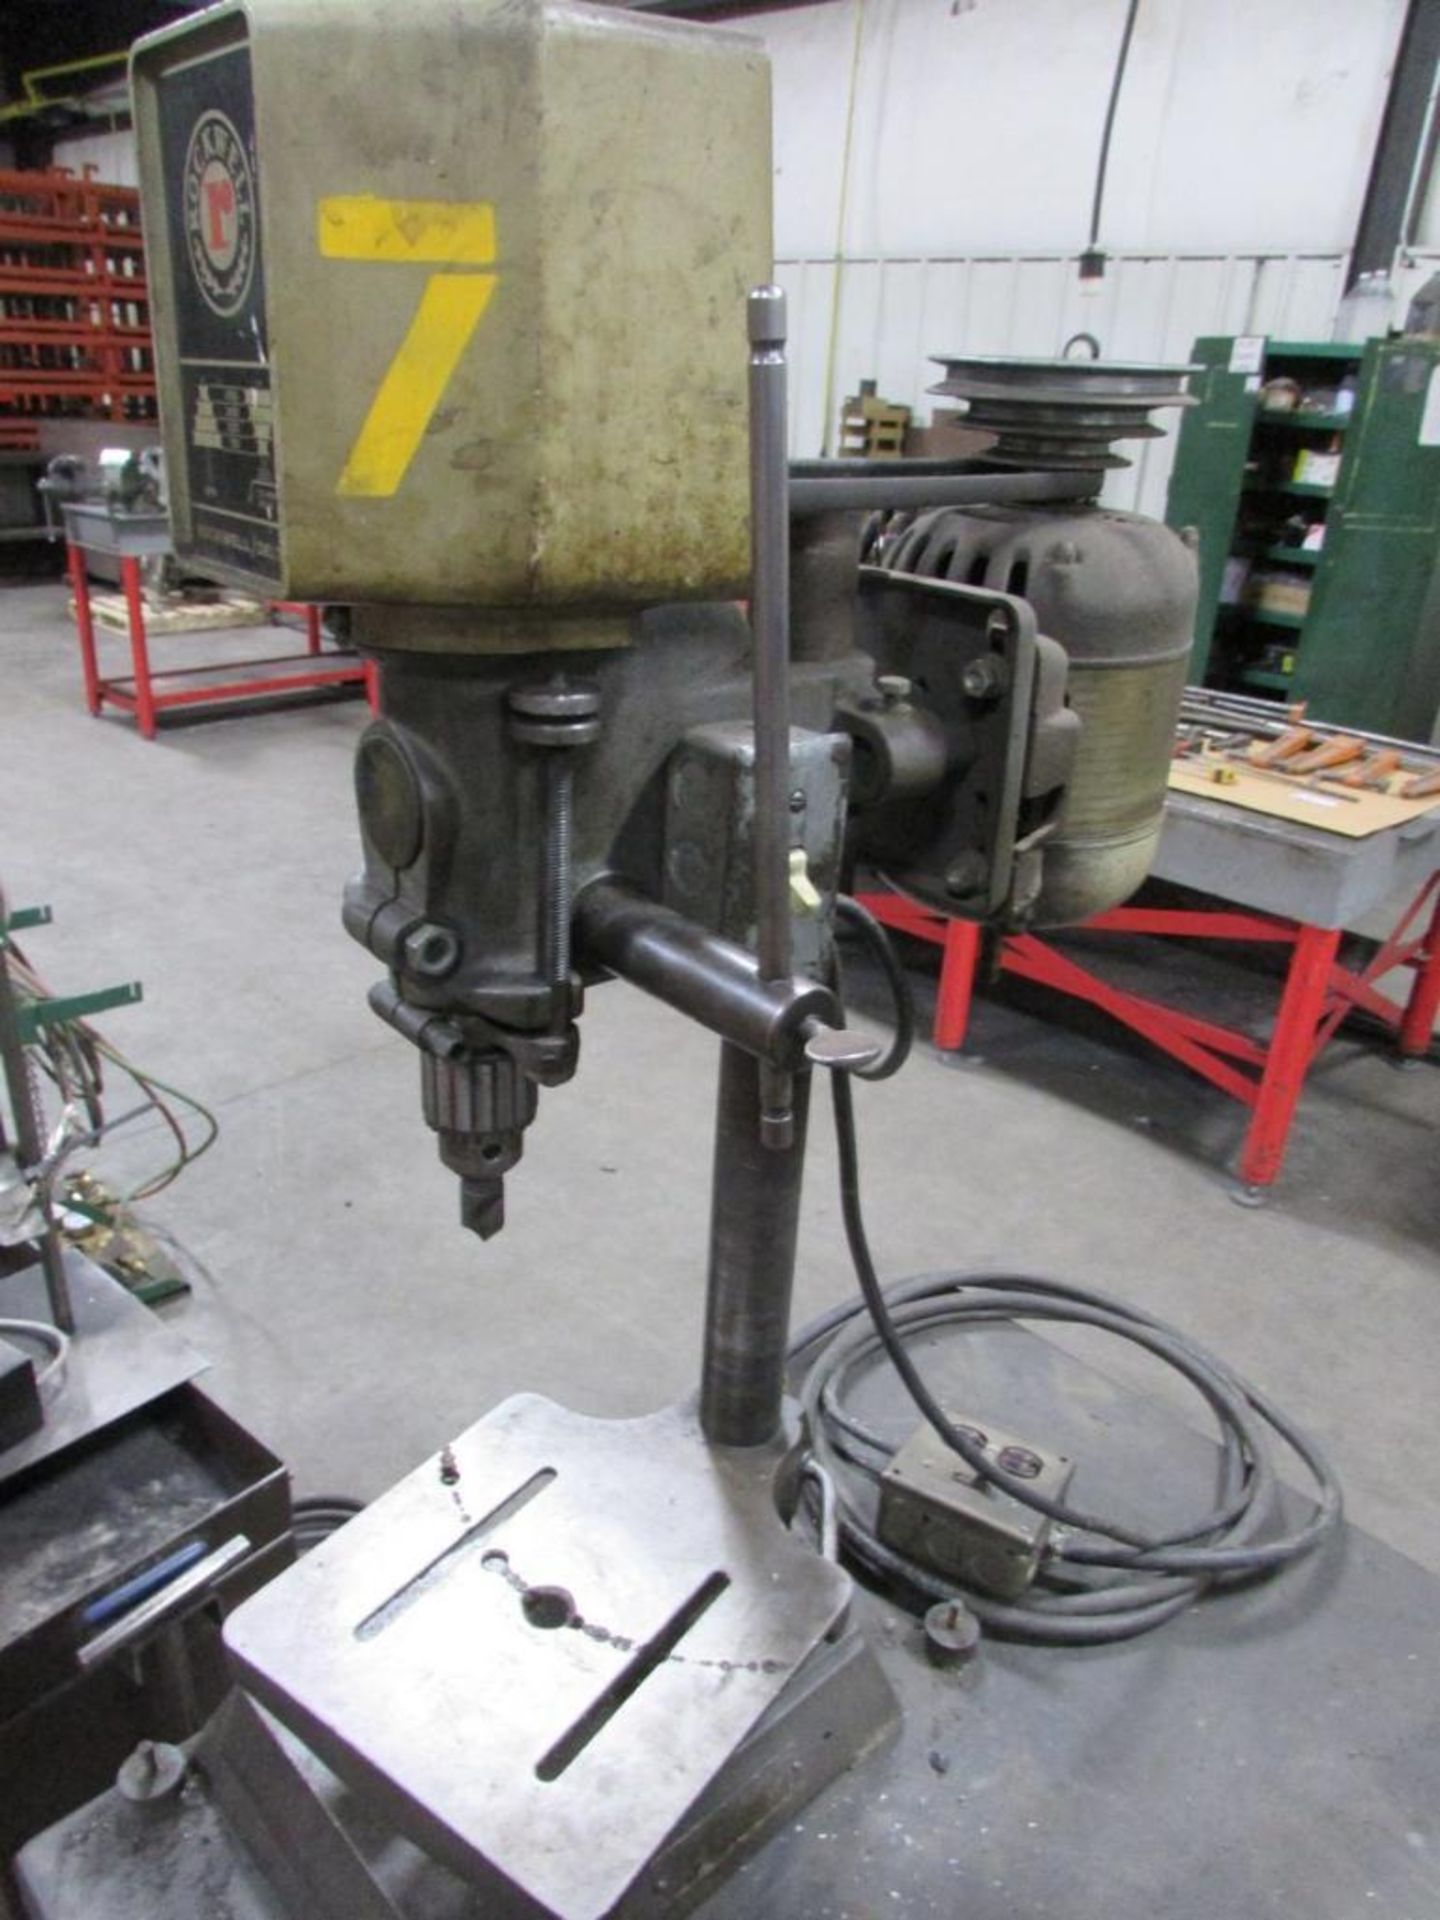 Rockwell/Delta 11" Benchtop Drill Press, 9" x 8.5" Table, 1/2" Jacobs Chuck, 4" Stroke, 1/2HP - Image 3 of 7